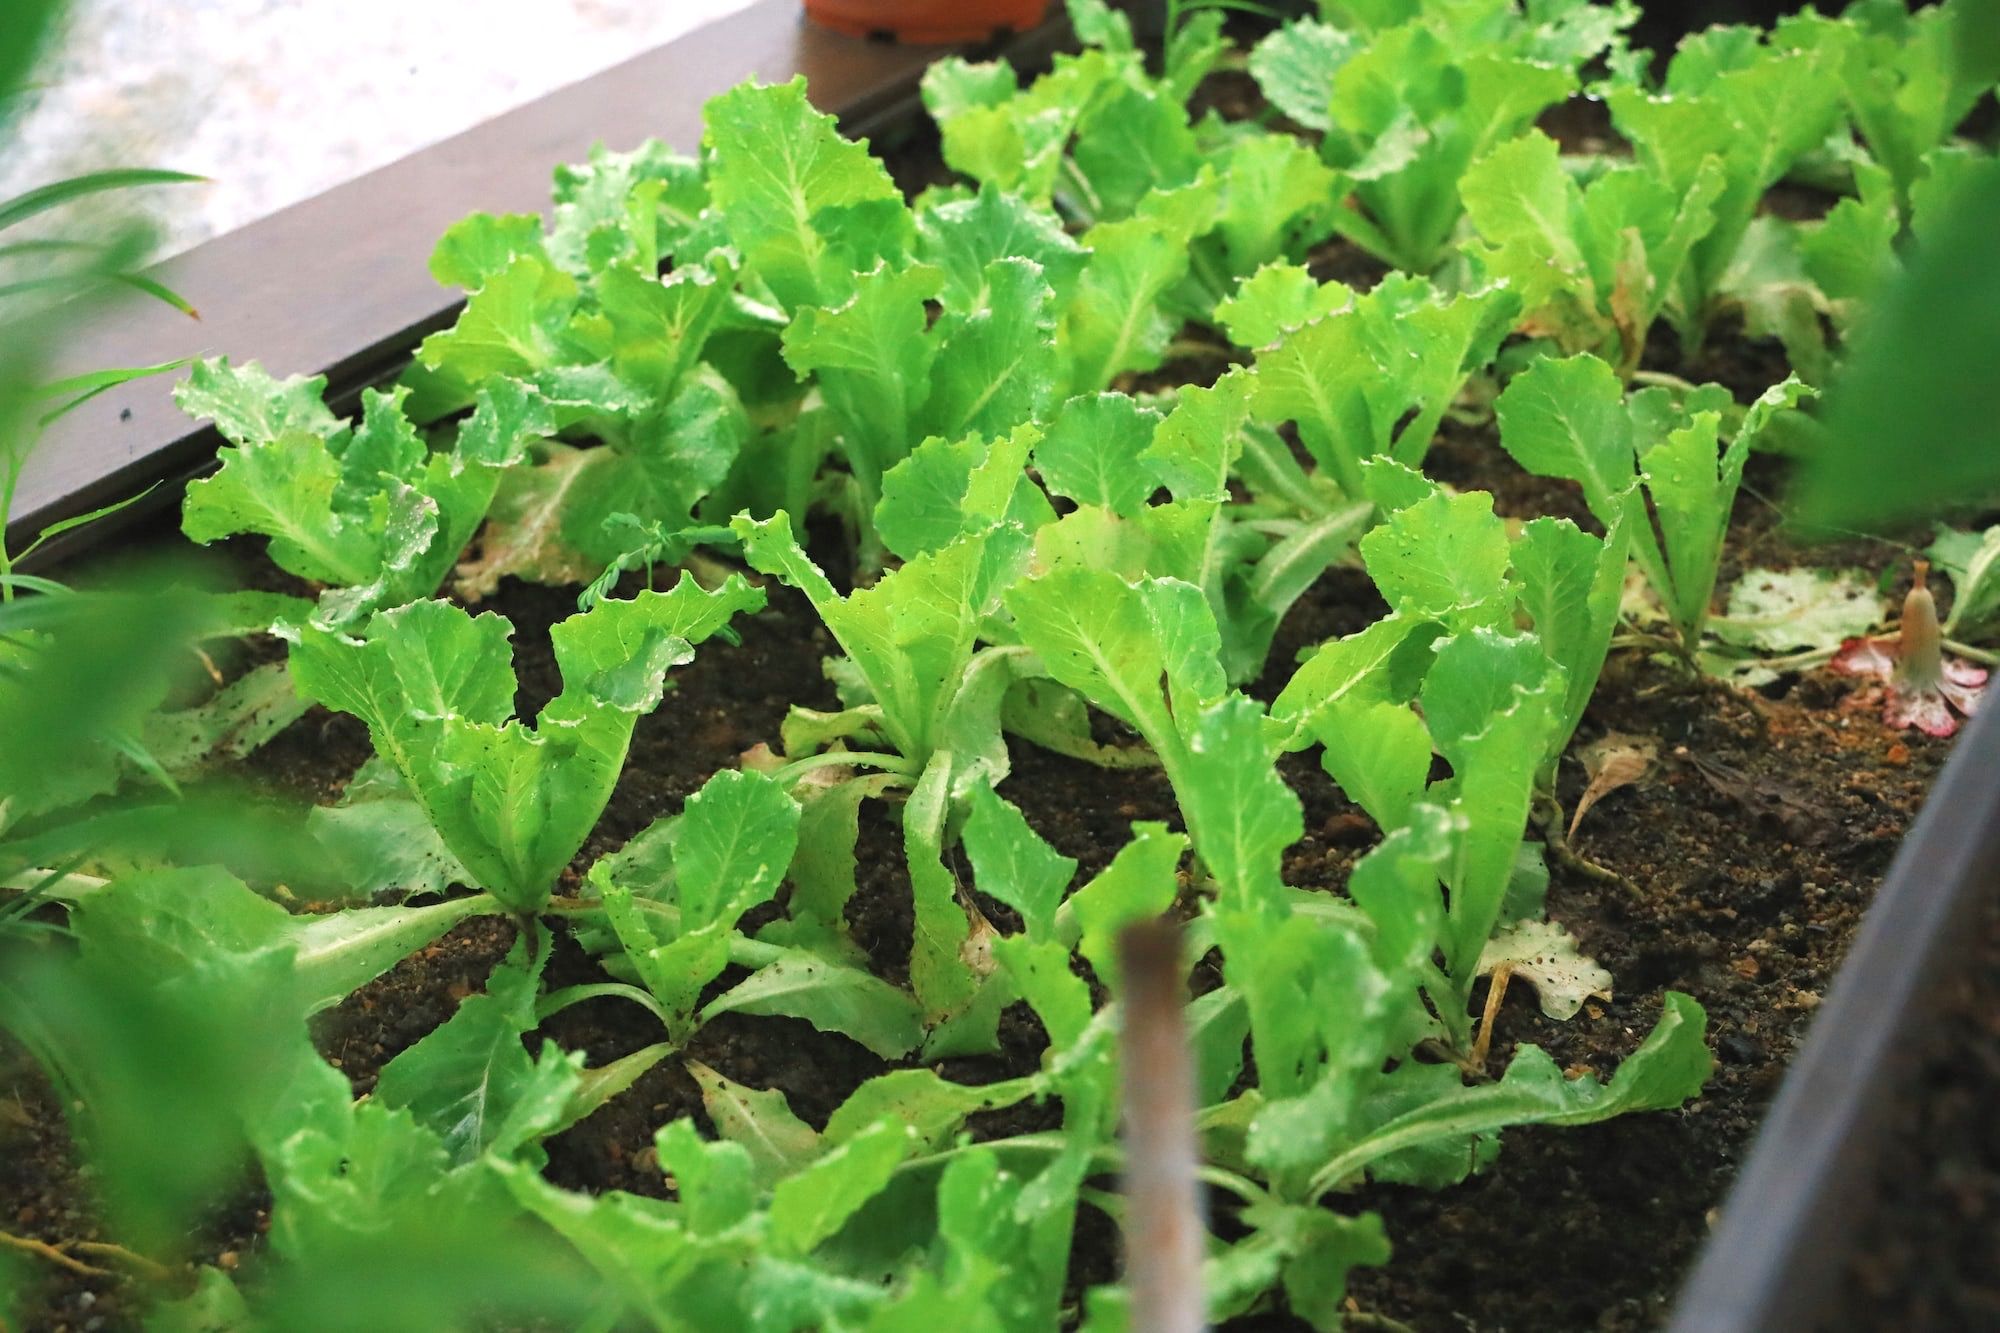 A patch of lettuce in container